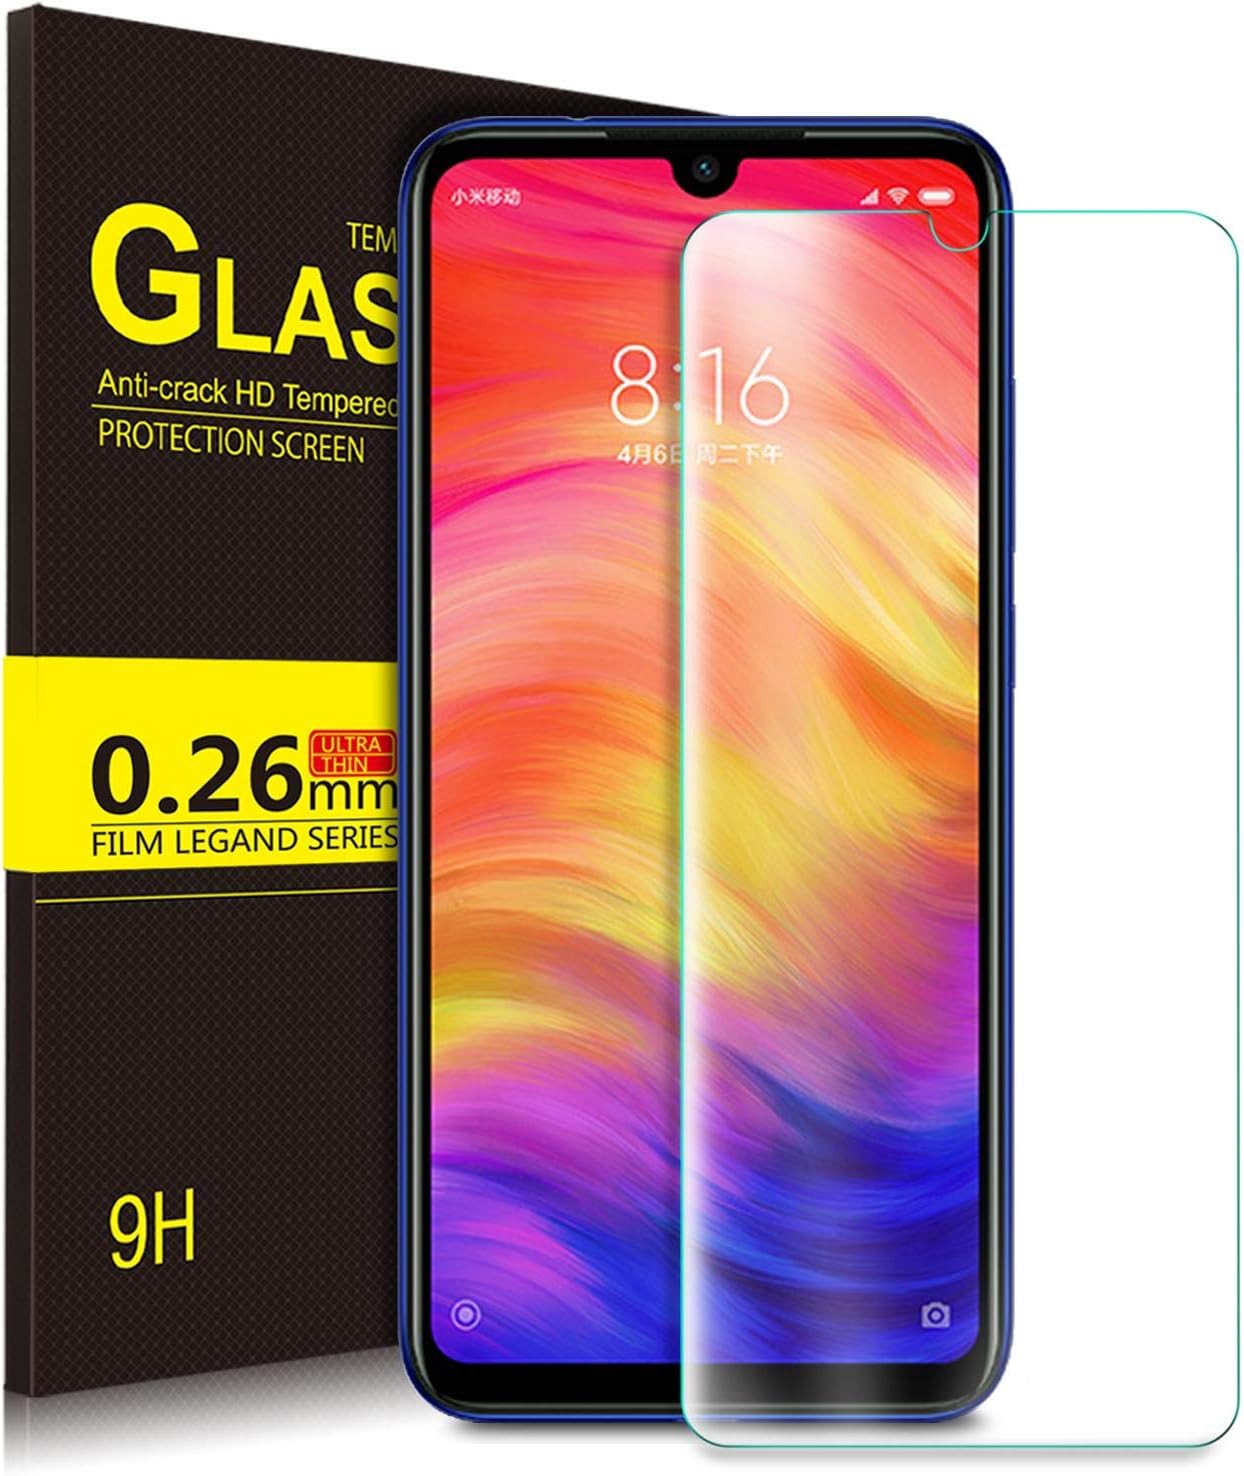 Kugi Tempered Glass Screen Protector for Xiaomi Redmi Note 7, Note 7 Pro - Clear